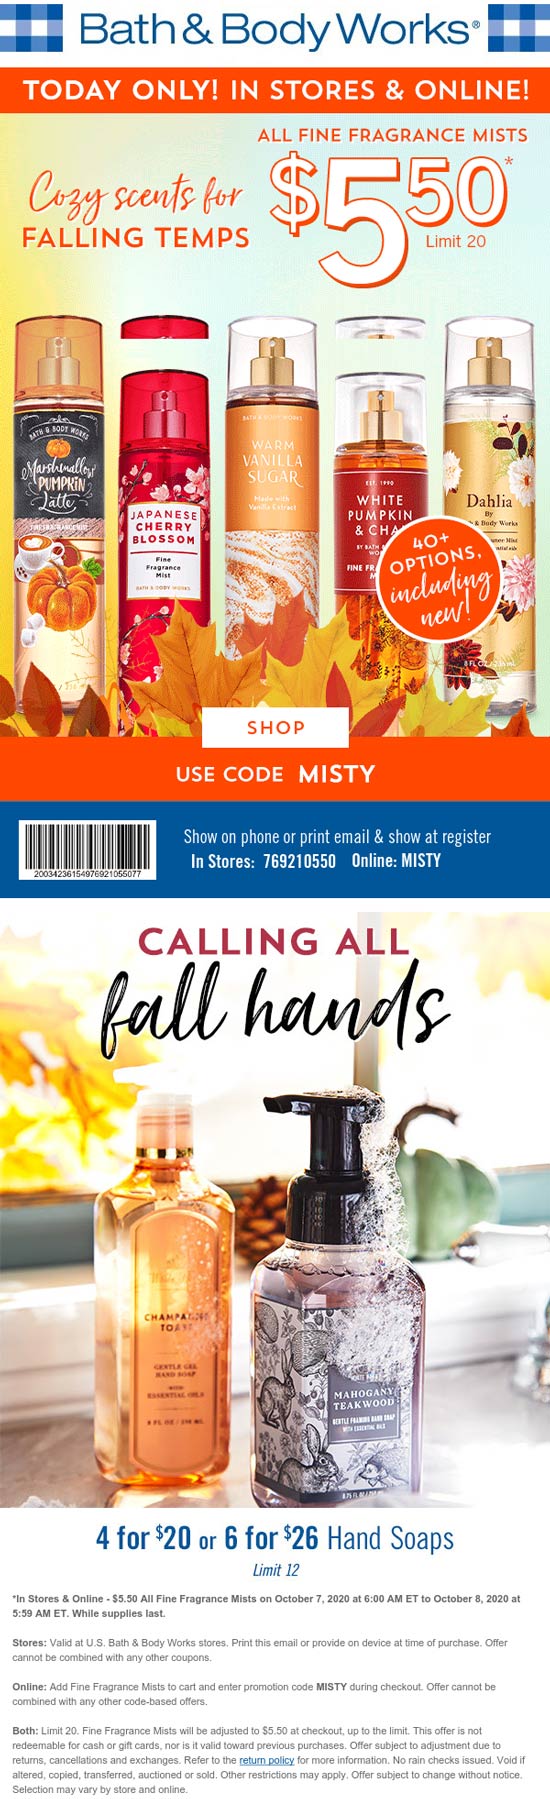 Bath & Body Works stores Coupon  Fragrance mists for $5.50 today at Bath & Body Works, or online via promo code MISTY #bathbodyworks 